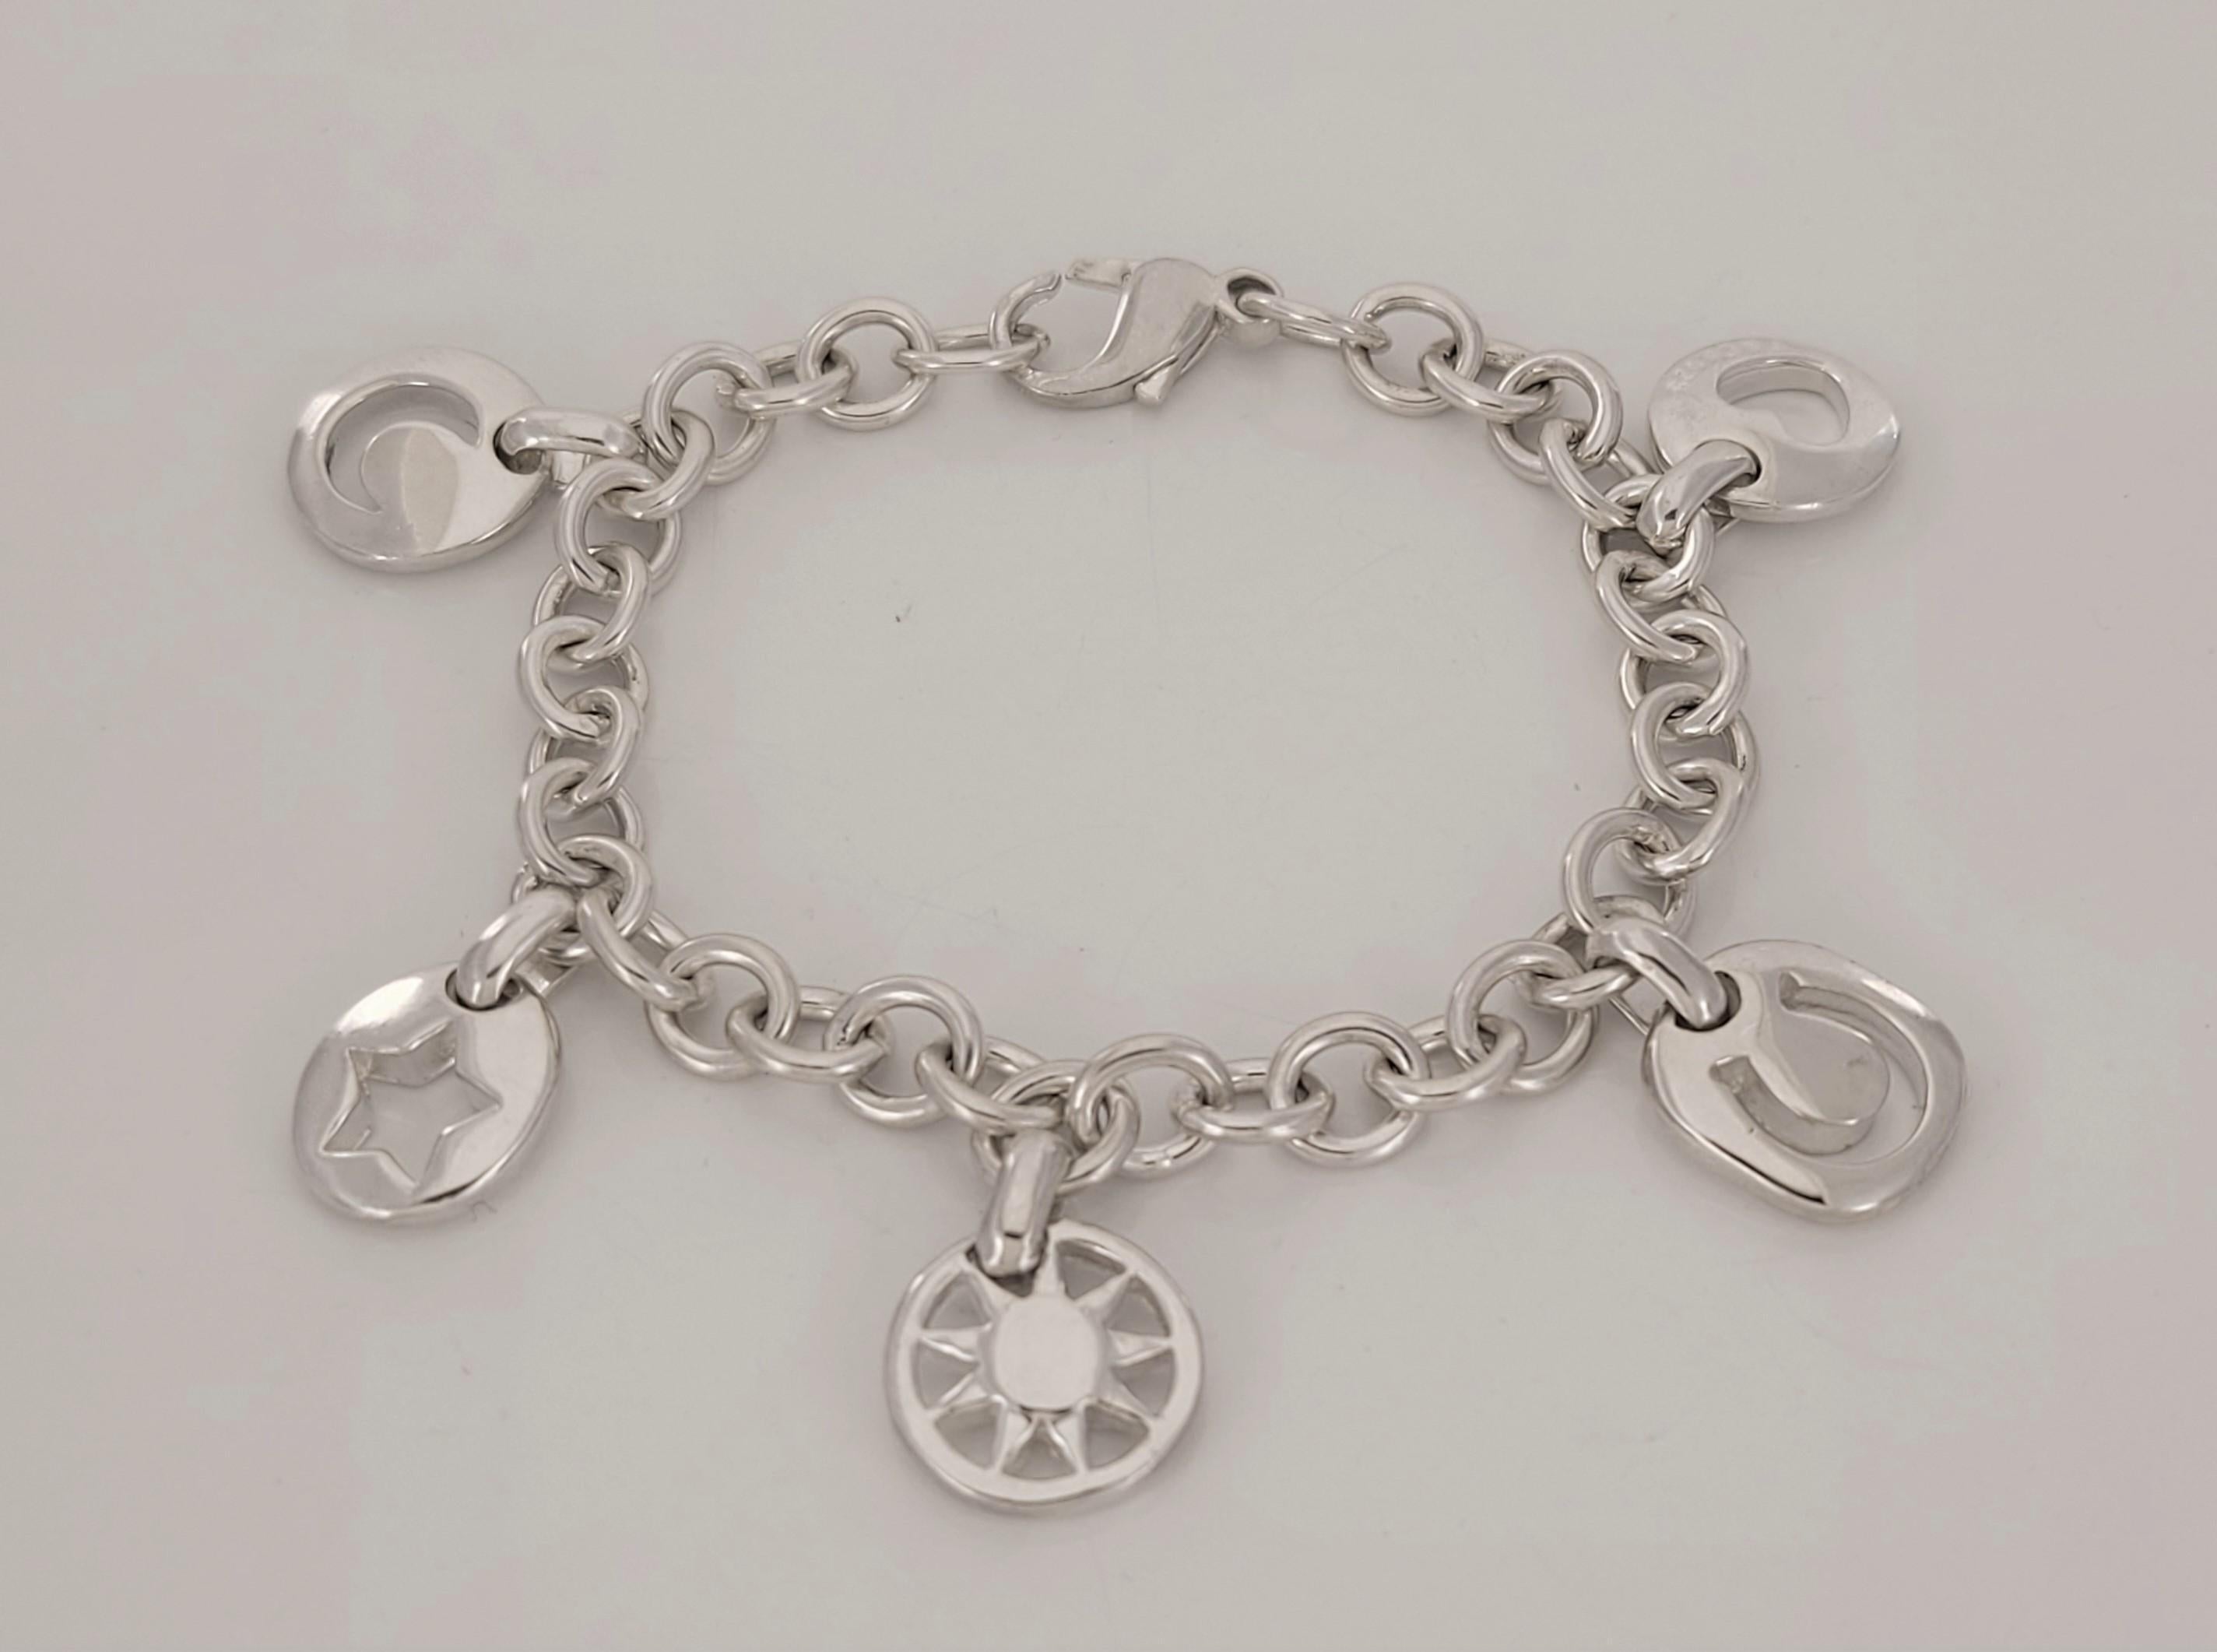 Brand Tiffany & co 
This Silver Tiffany Charm bracelet has five stencil charm bracelet
Heart, Sun, Star, Horseshoe 
Material Sterling Silver 925
Bracelet Length 7.5'' Long 
Chain weight 33.2 gr
Condition New, never worn
Comes with Tiffany & co pouch